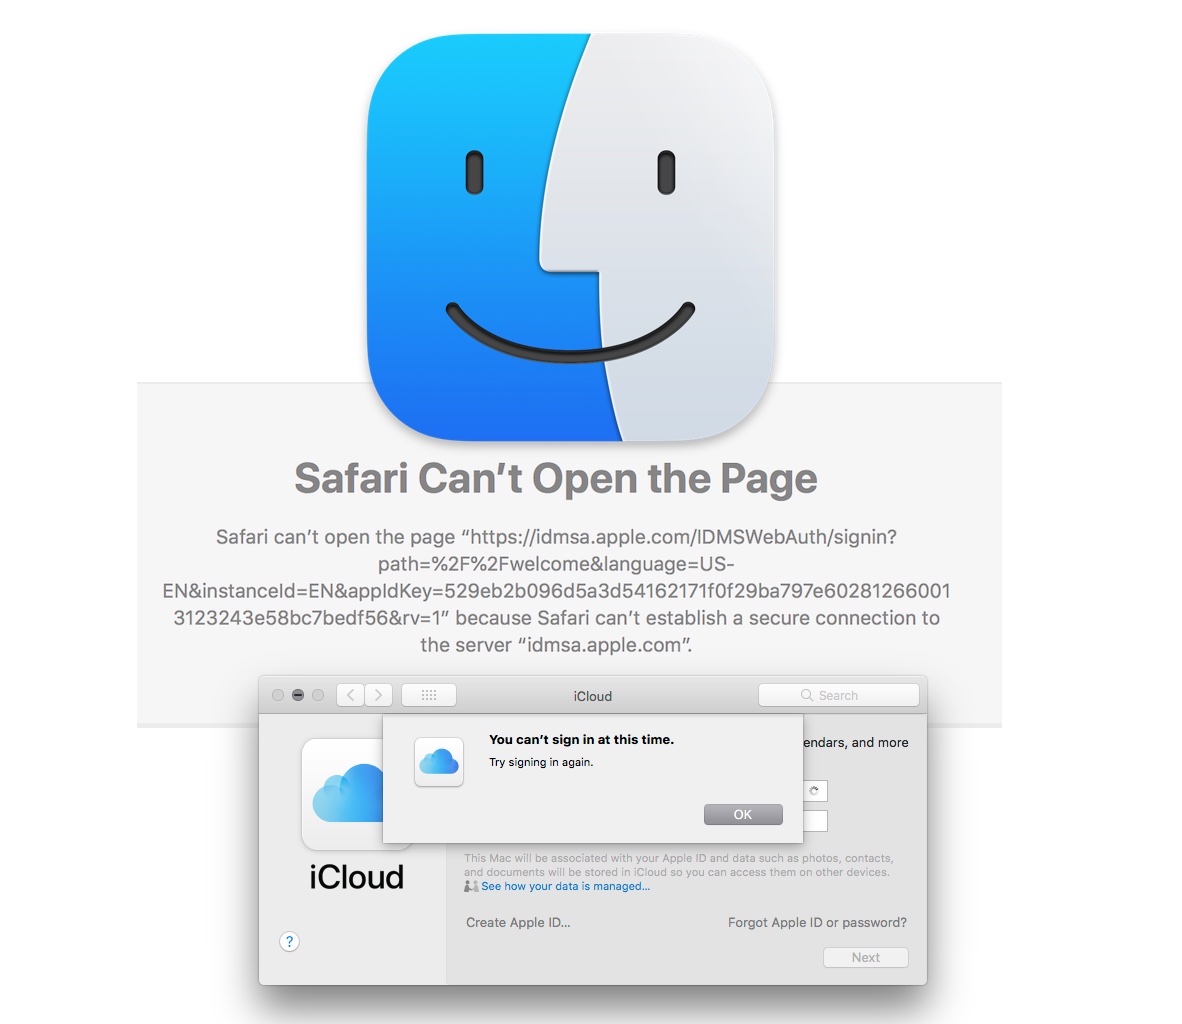 Fix iCloud Errors & “Can’t Establish Secure Connection with idmsa.apple.com” on MacOS Sierra & High Sierra